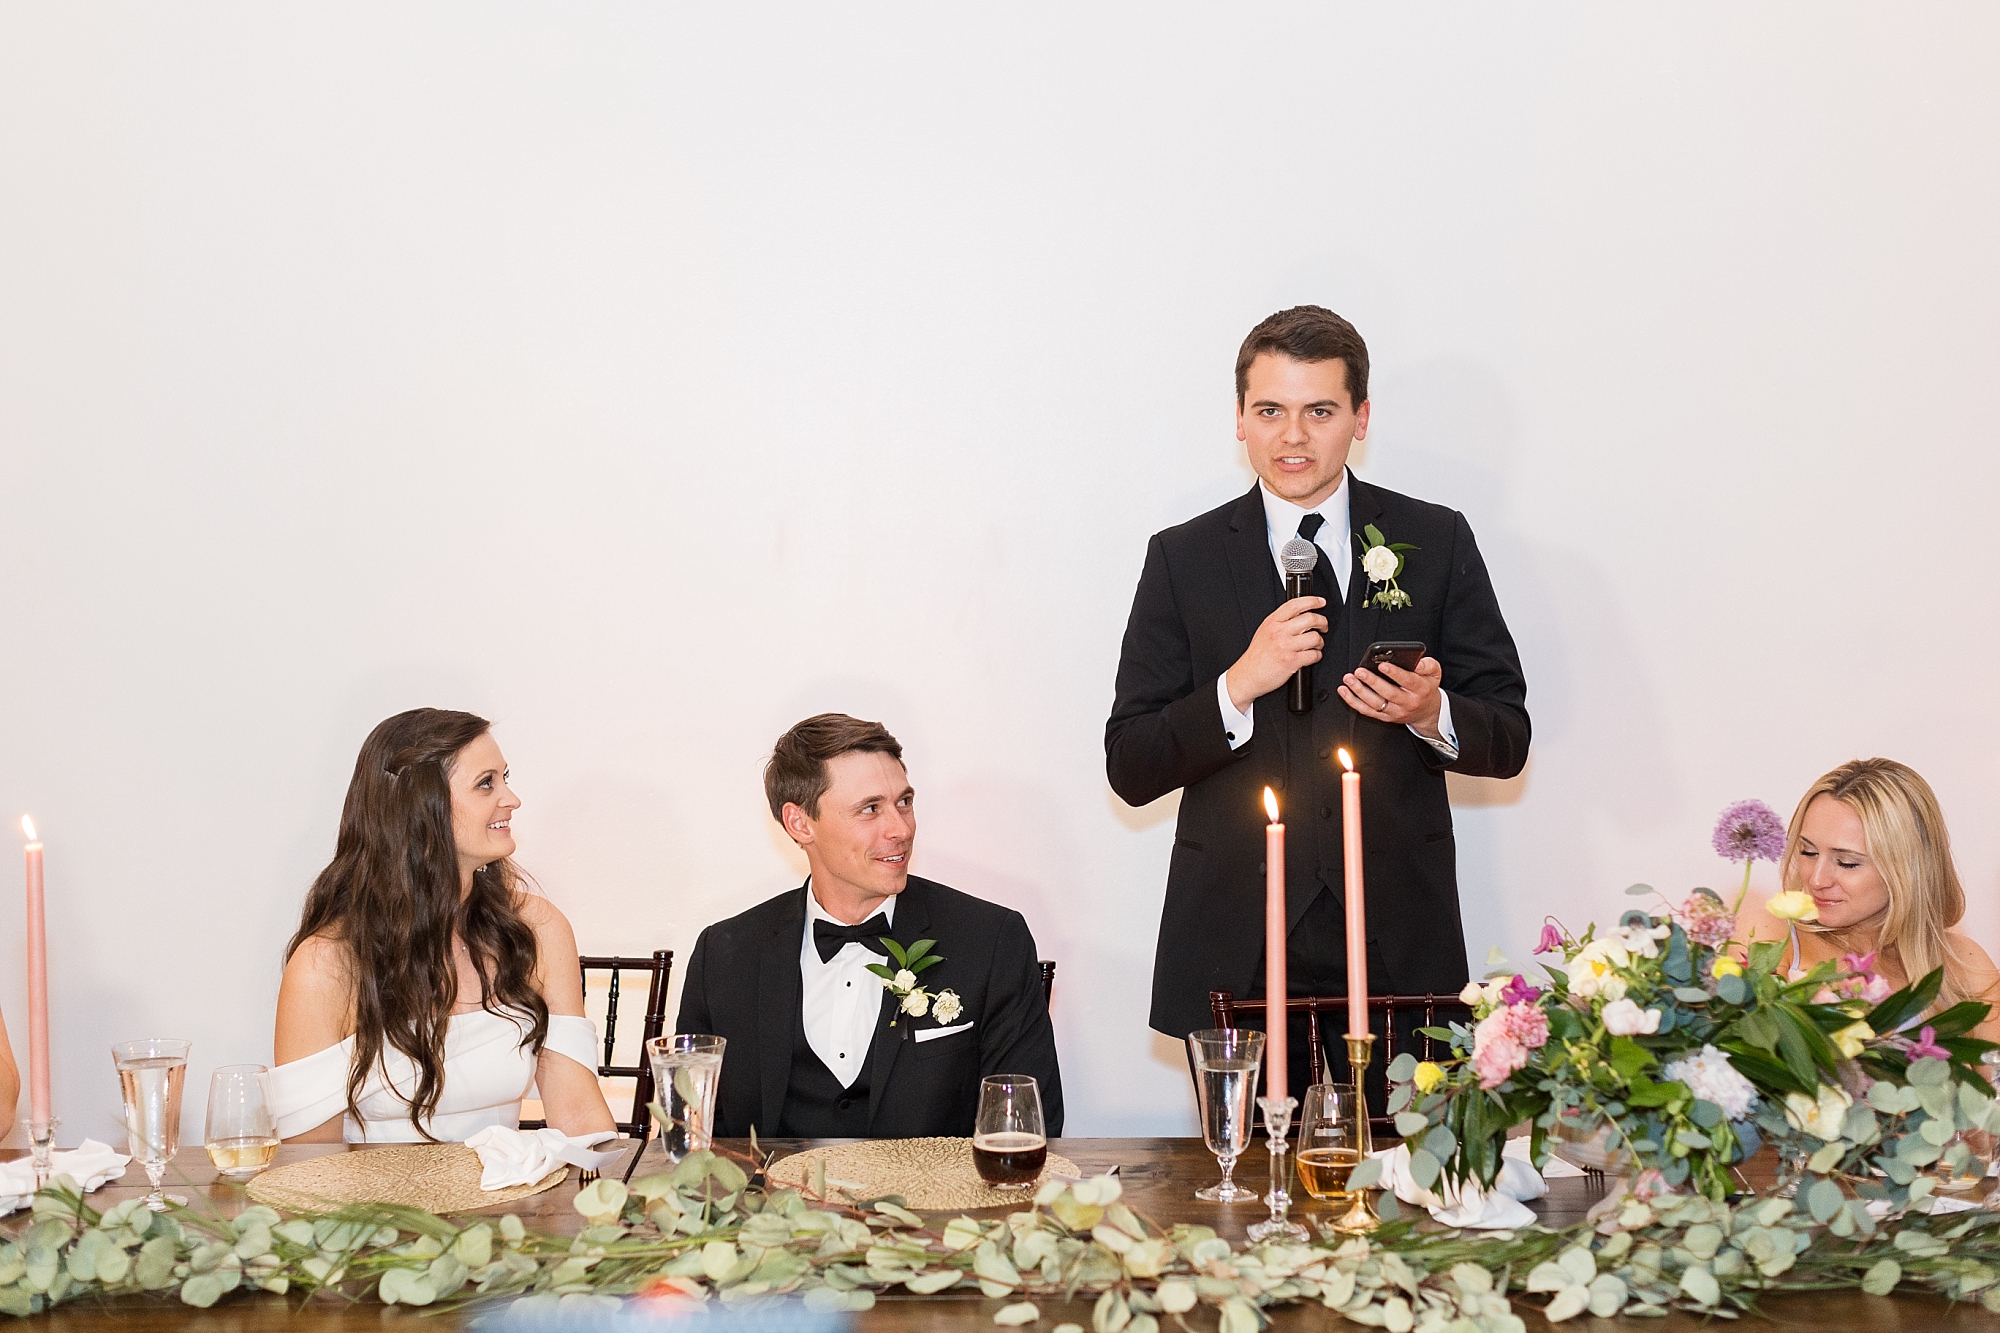 Toasts at the reception to the bride and groom  | Merrimon Wynne Wedding | Sarah Hinckley Photography | Raleigh NC Wedding Photographer